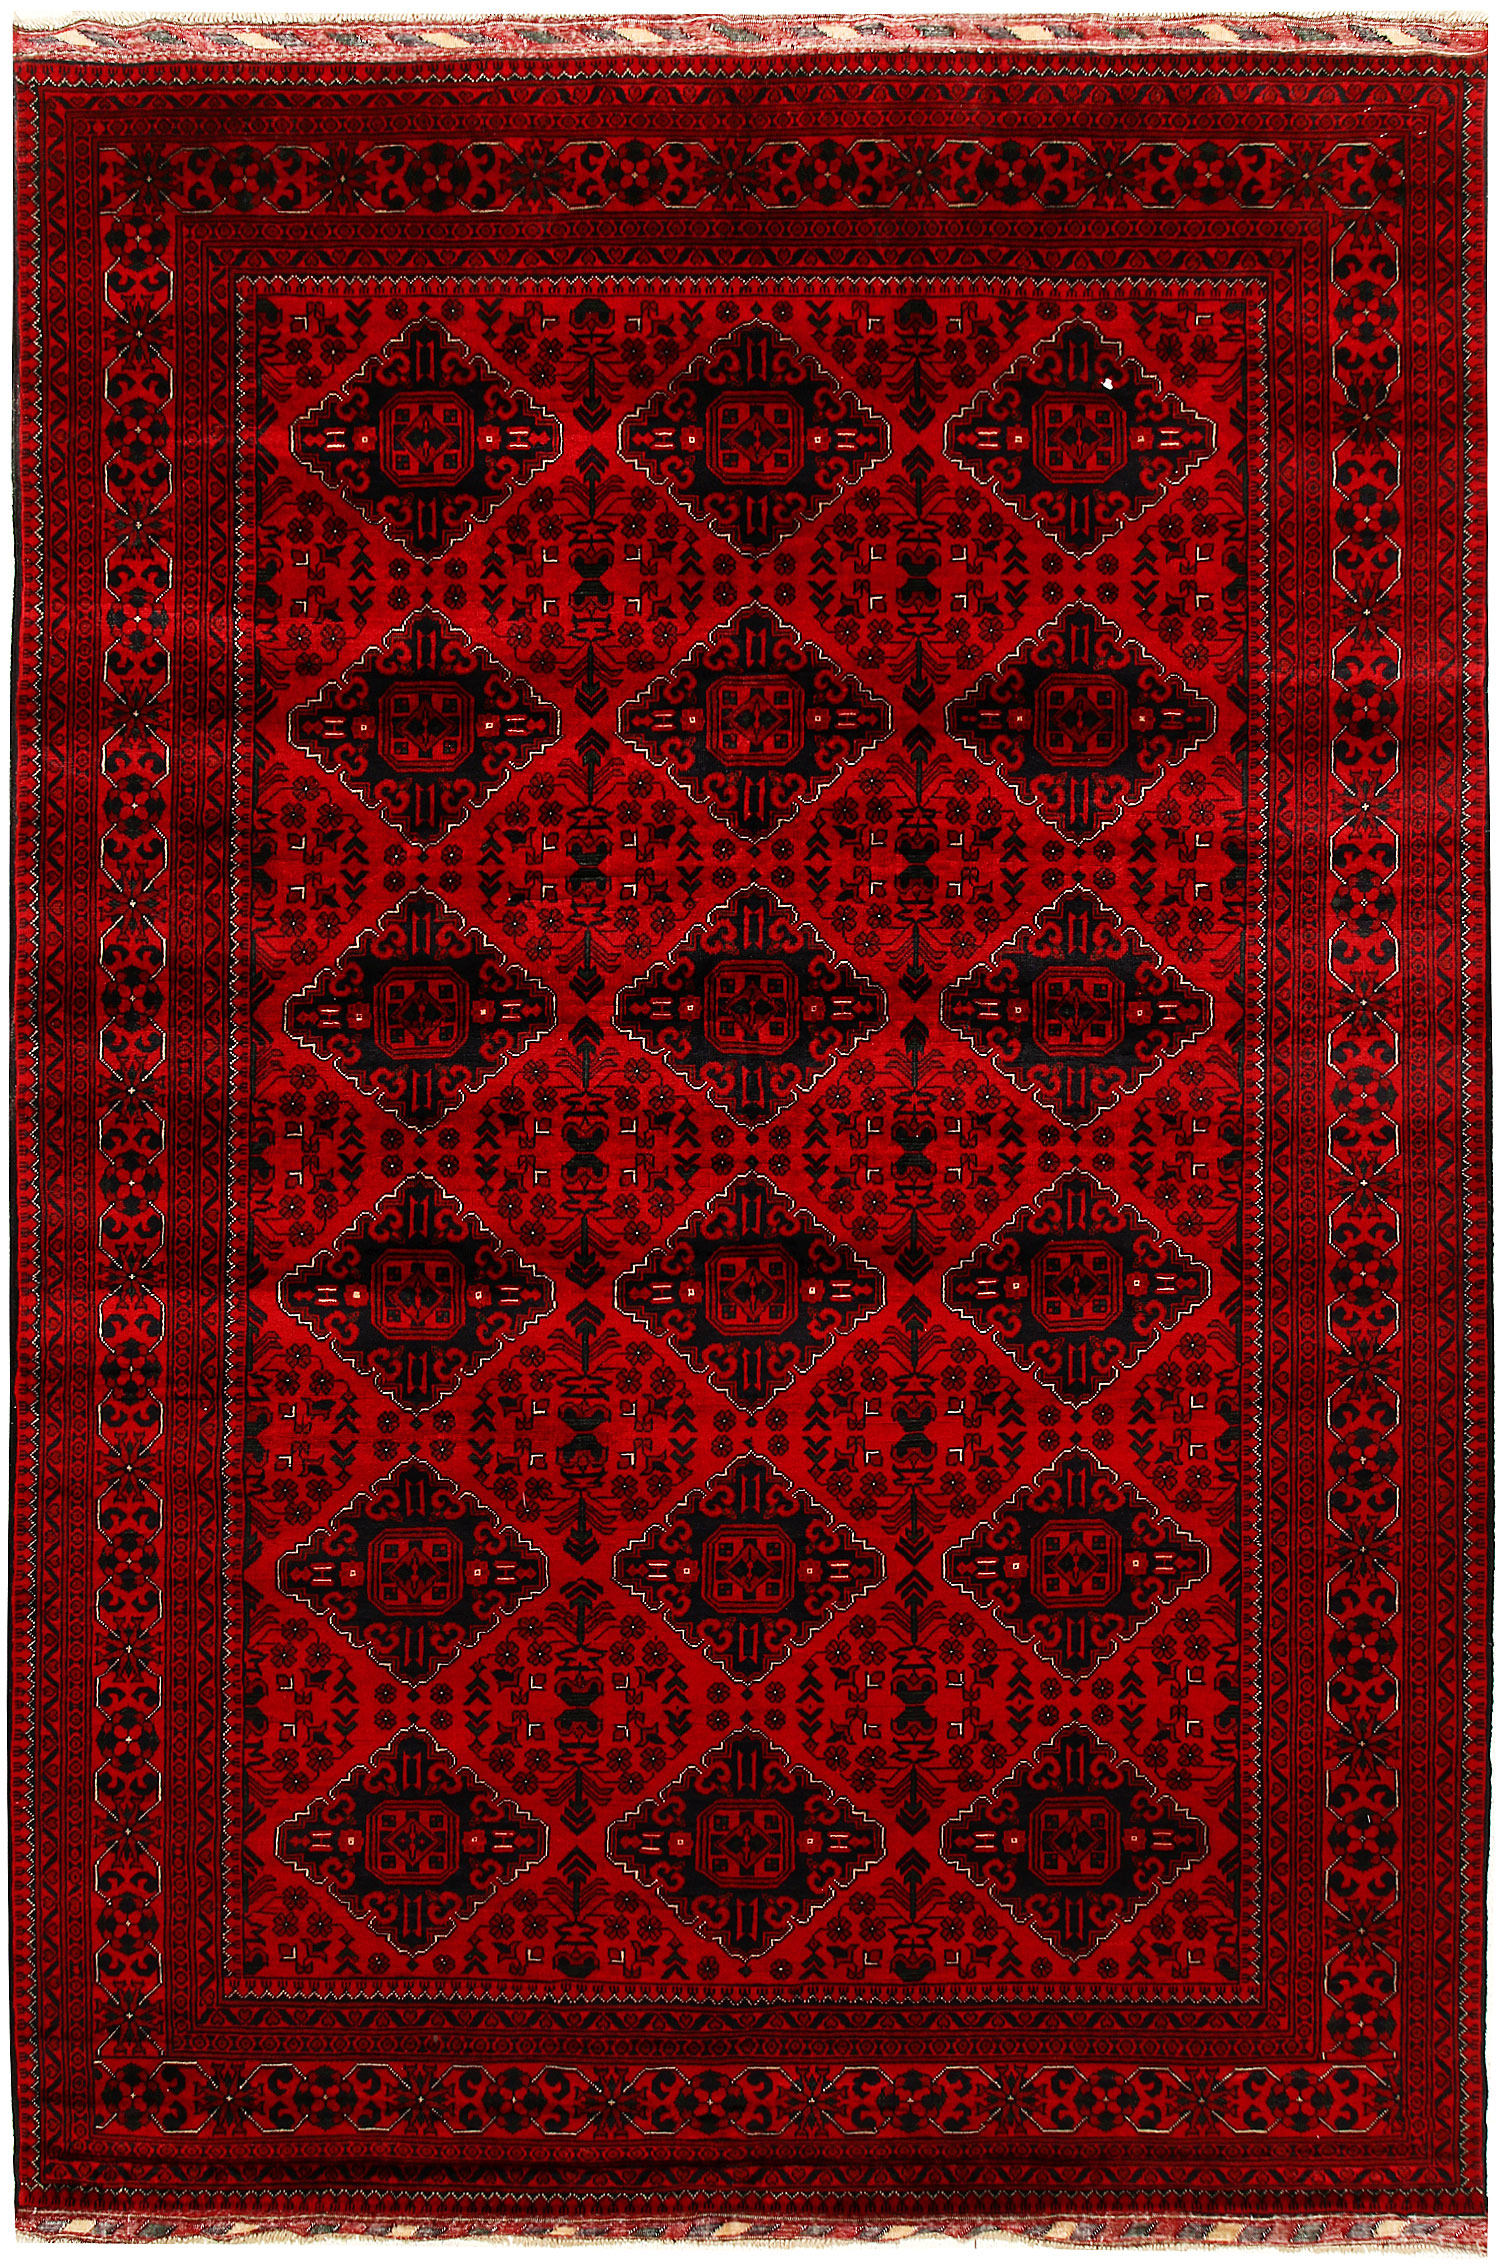 Indian Rug Types